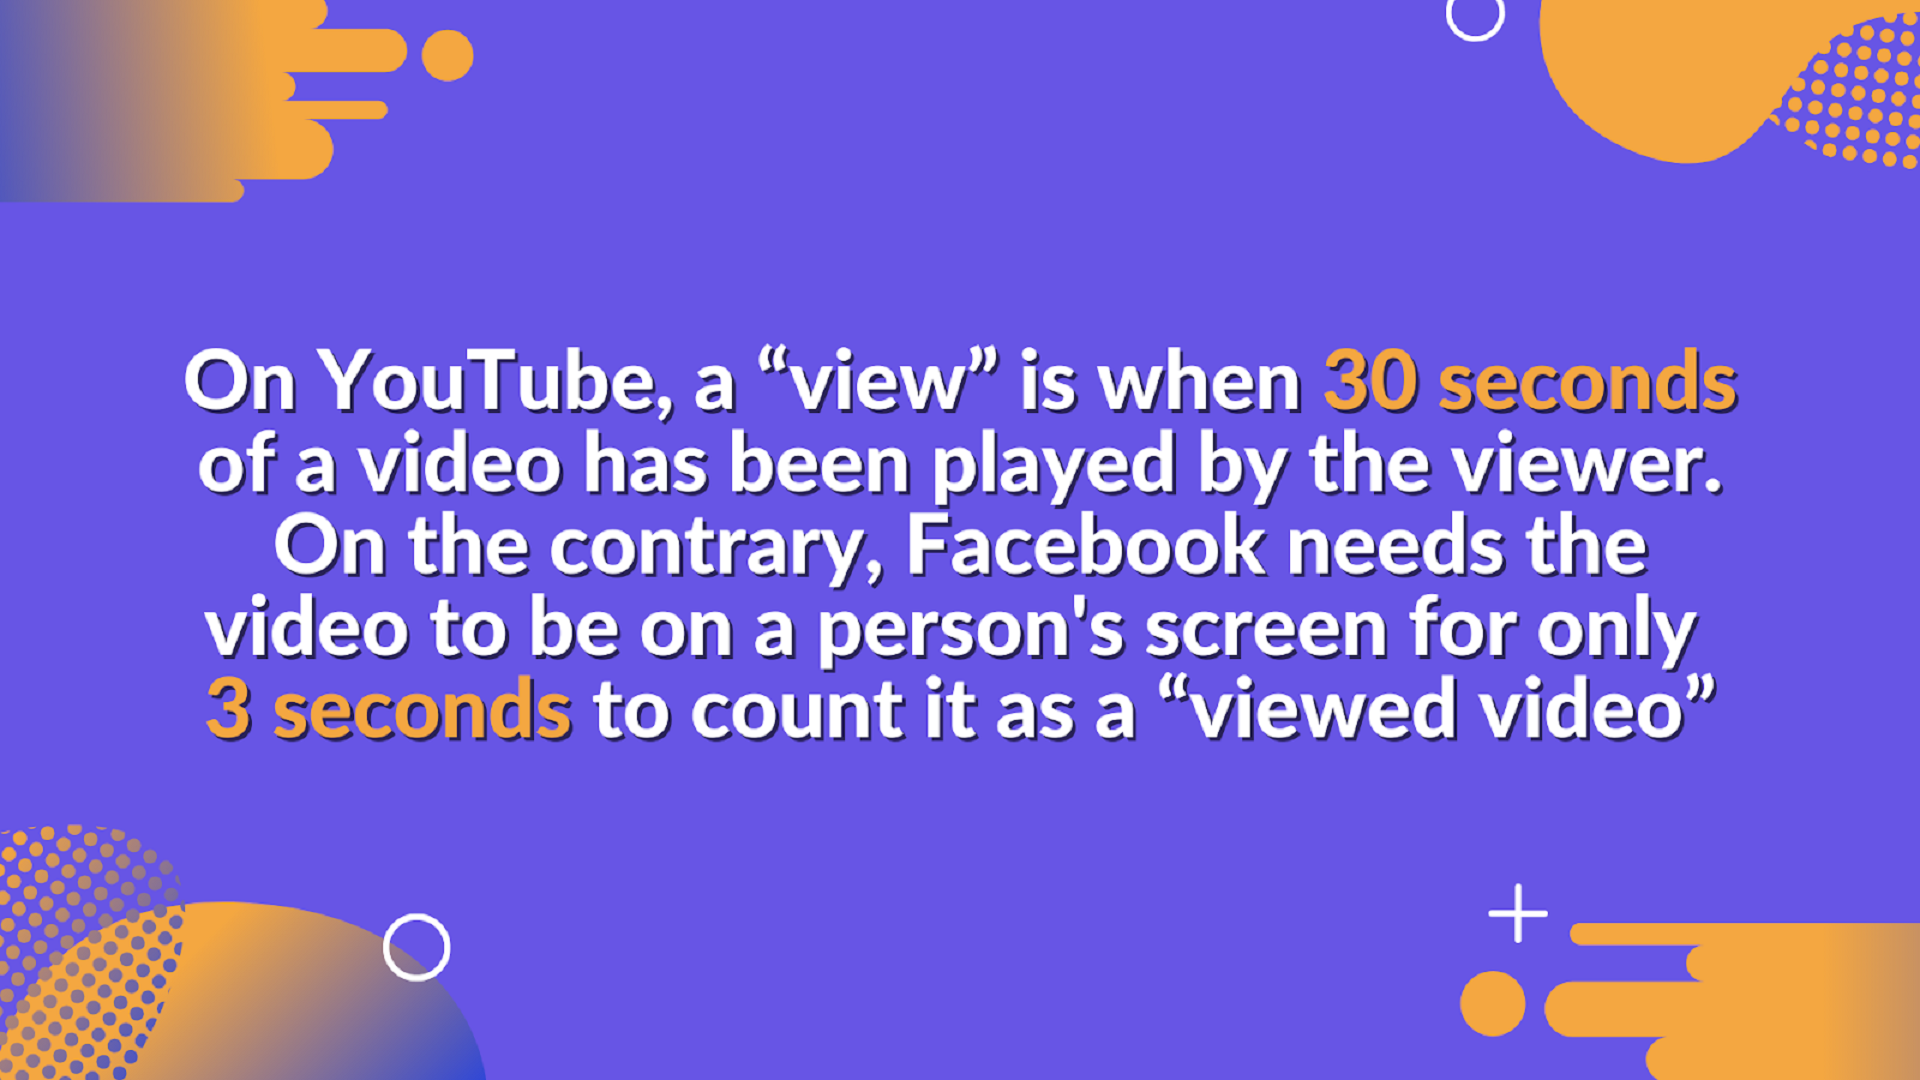 How to increase views on YouTube